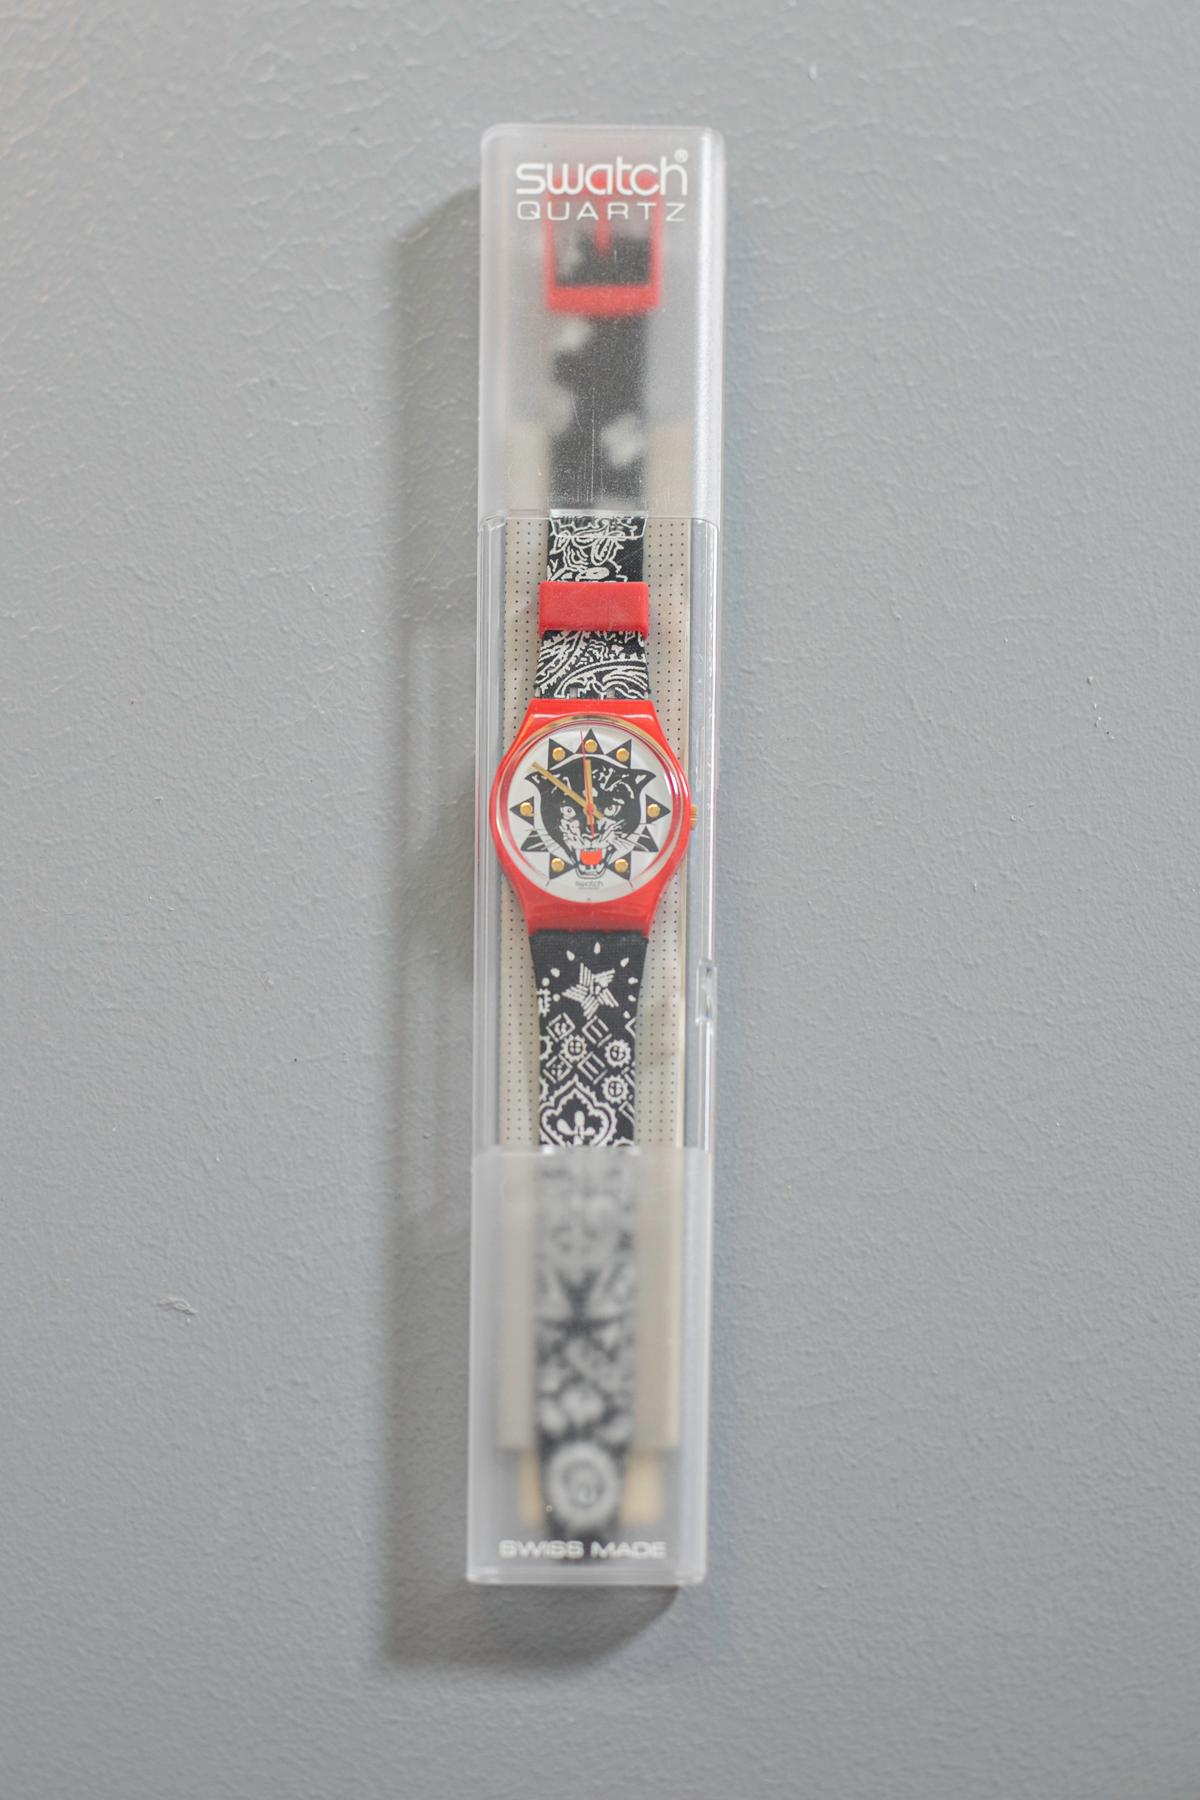 swatch archive